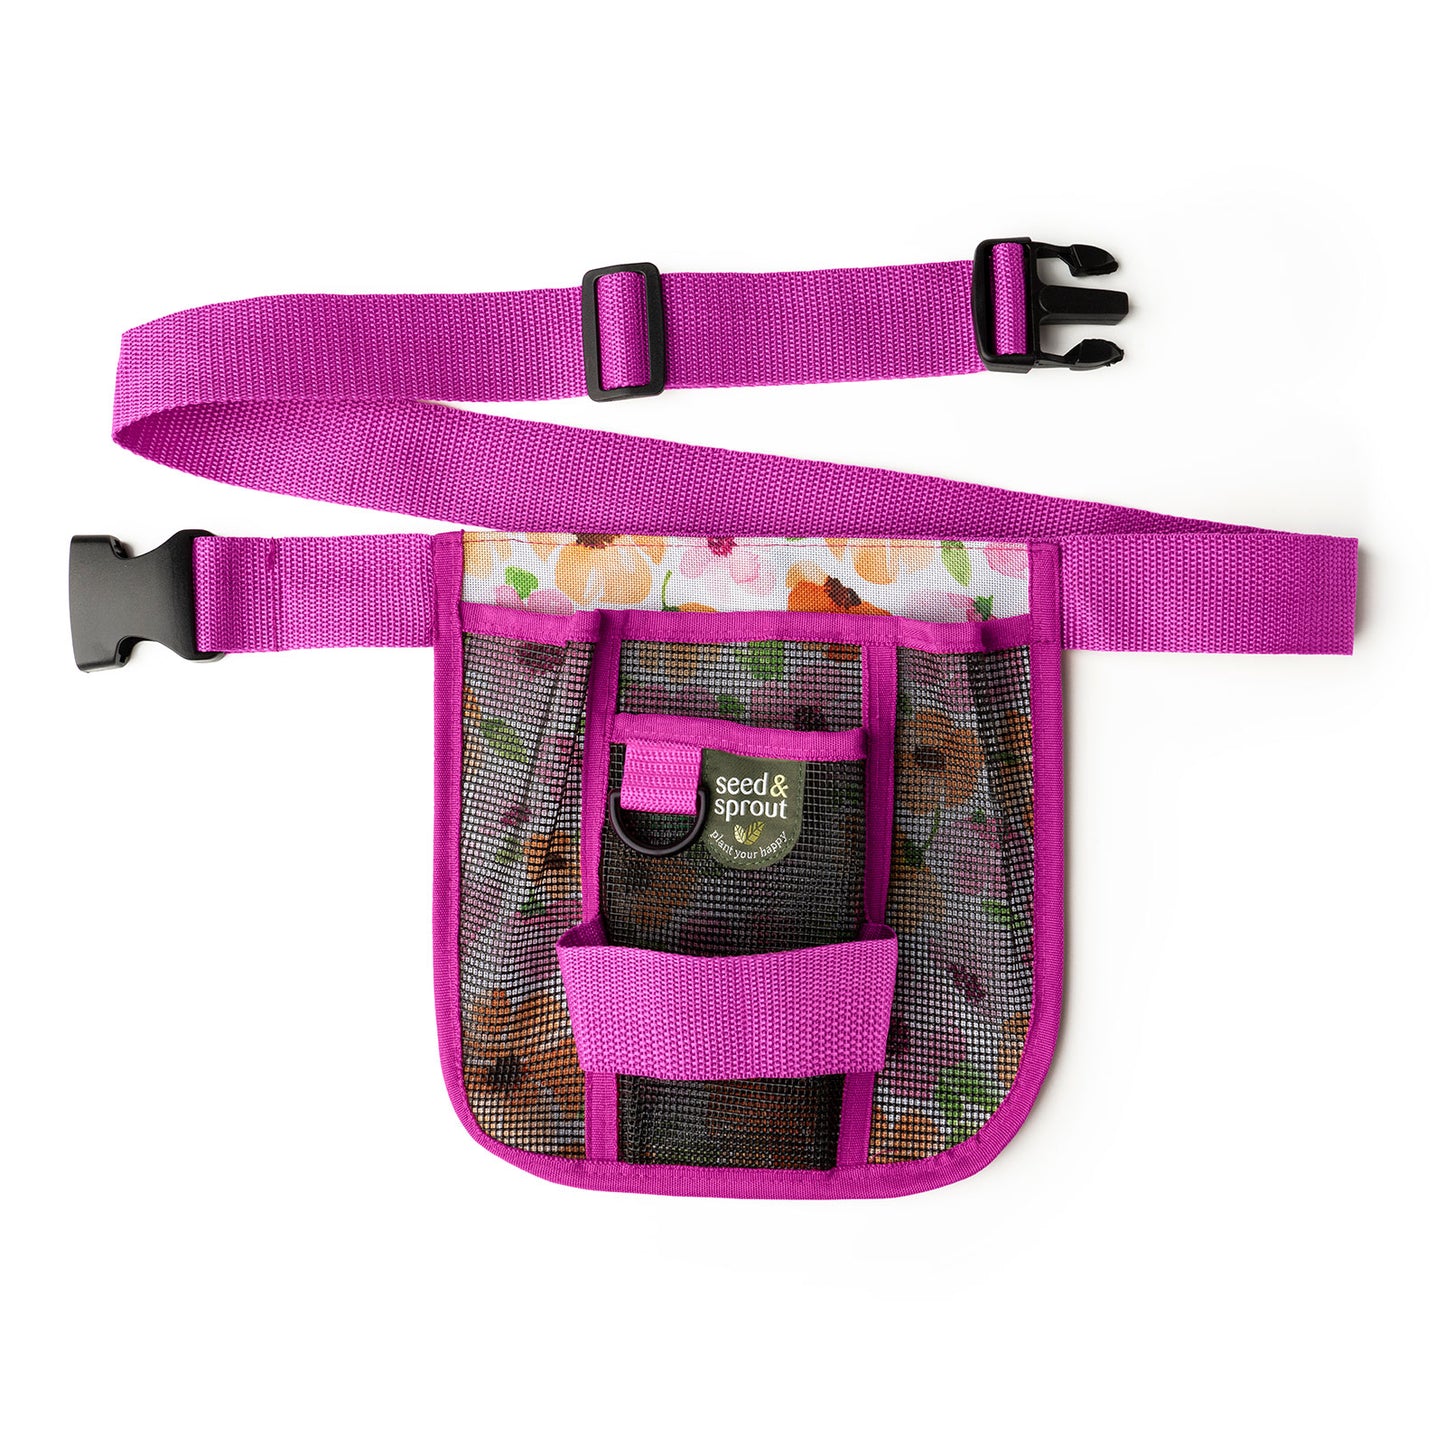 Seed and Sprout Gardening Tool Belt August Bloom